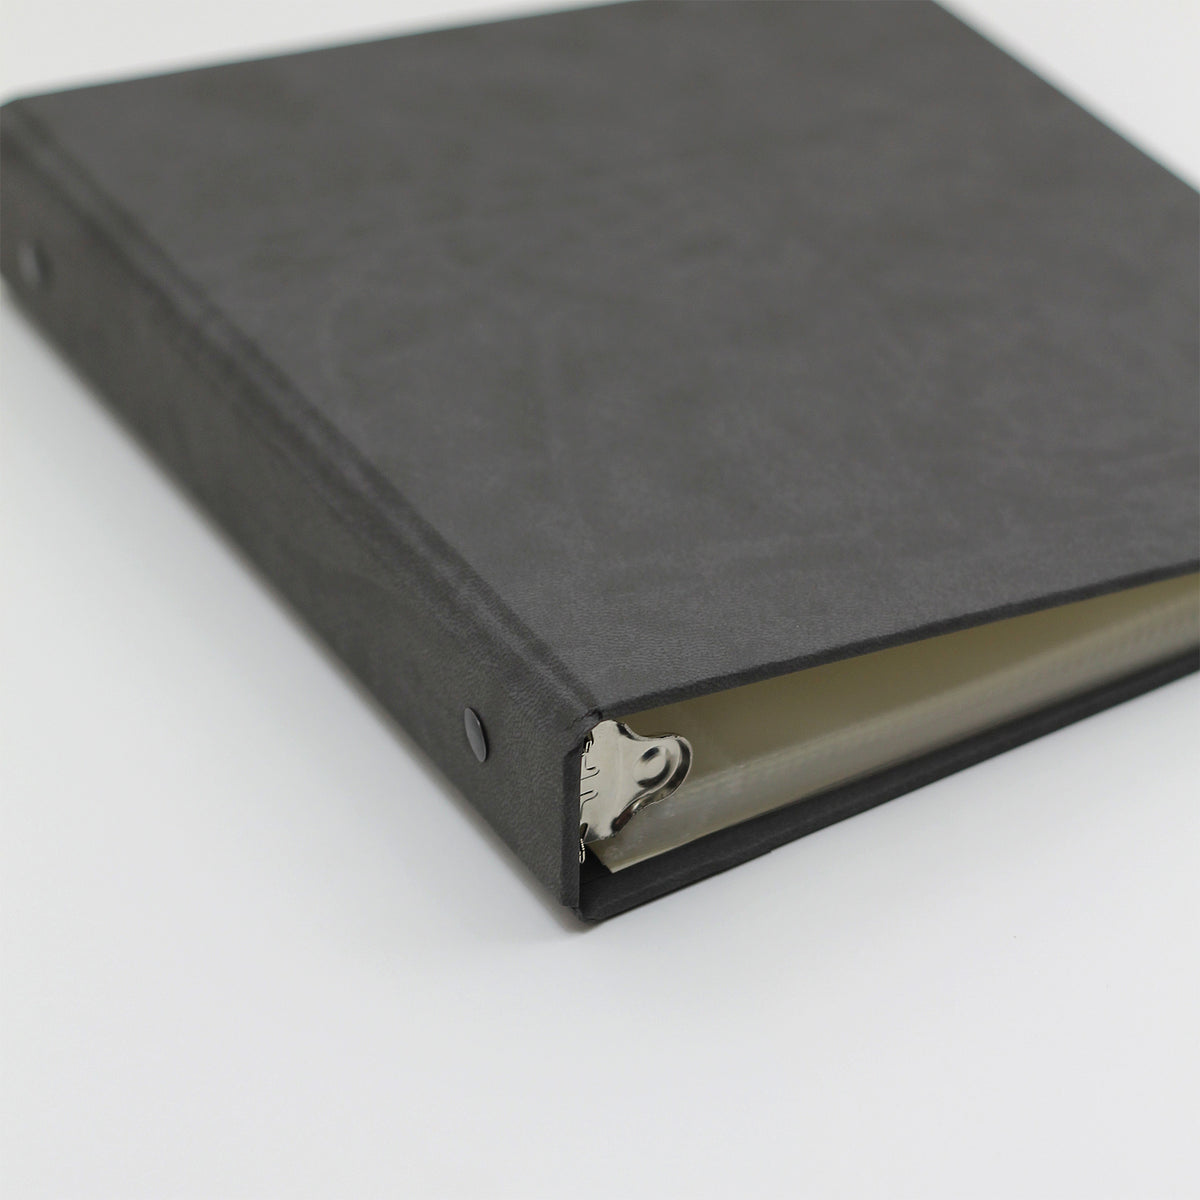 Medium Photo Binder | for 4 x 6 photos | with Slate Vegan Leather Cover